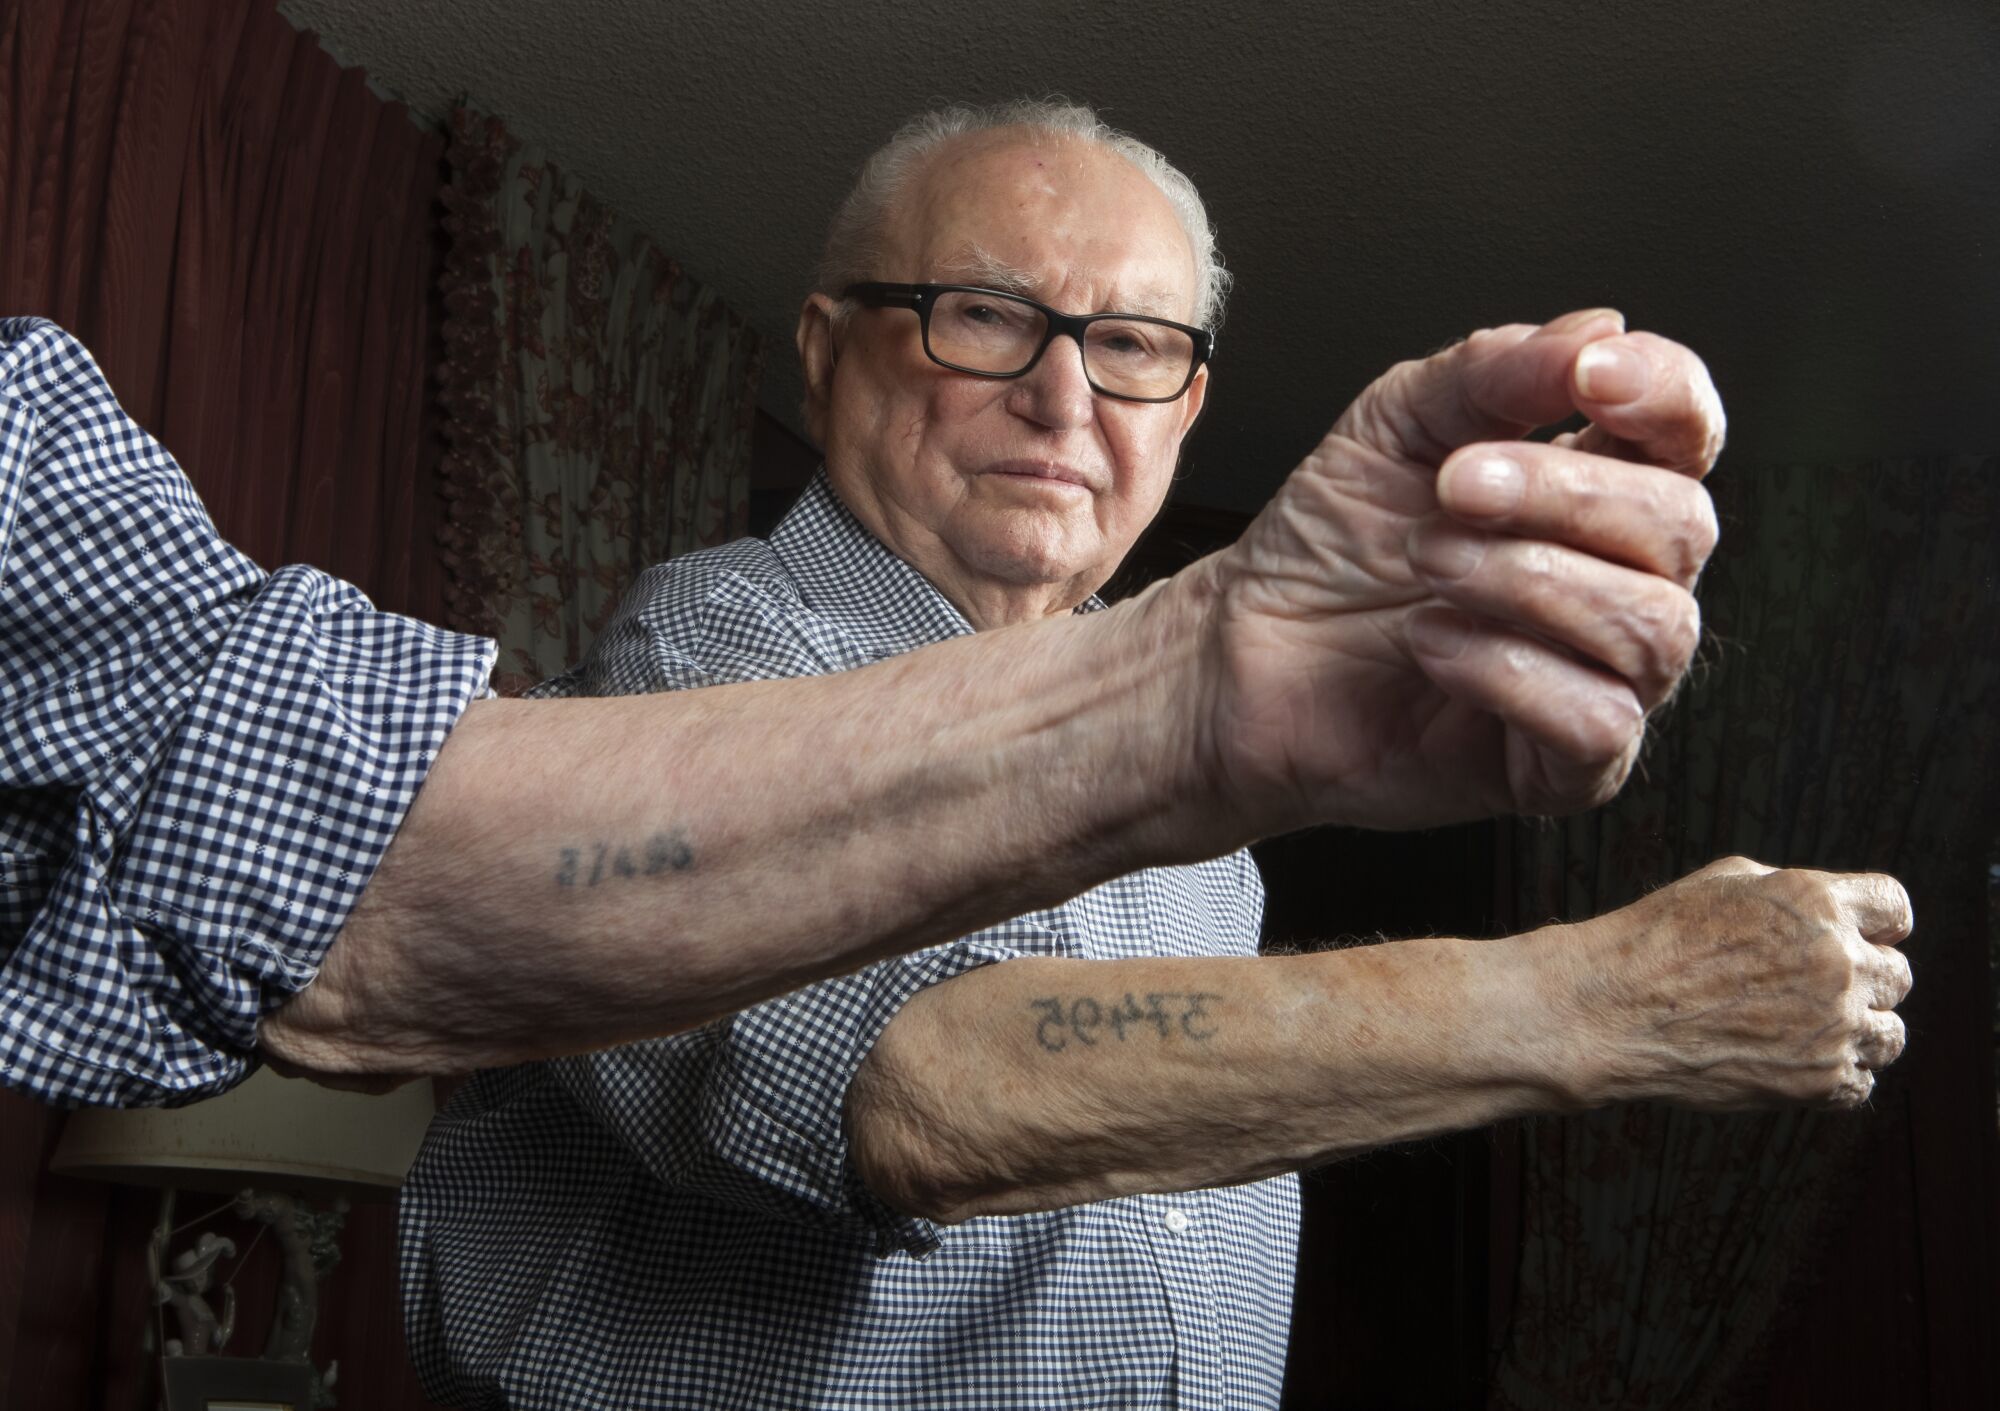 Hakman shows his prisoner number tattooed on both sides of his left arm. He received the smaller one, in the foreground, when he first arrived at Auschwitz in 1942, and the larger one the next day at Birkenau.